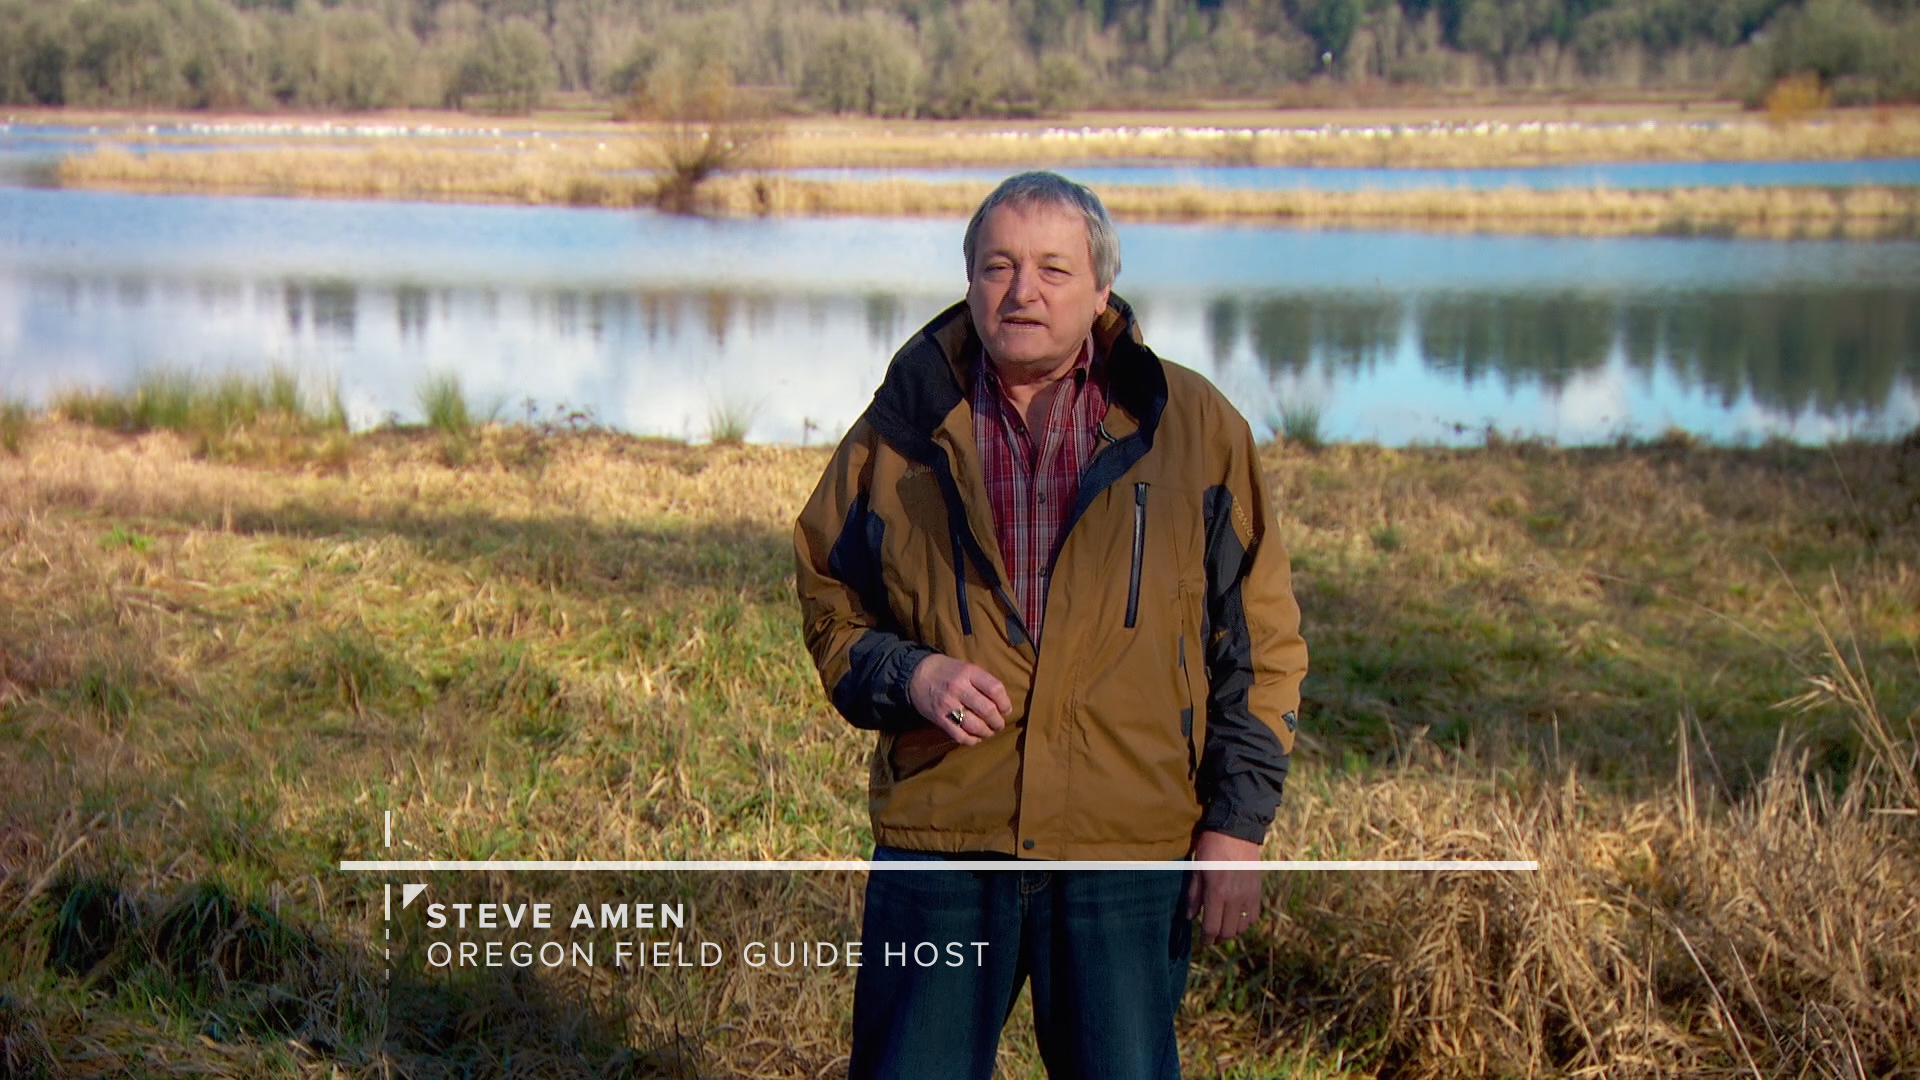 Lower third graphics for Oregon Field Guide overlaid on footage of Steve Amen standing near wetlands